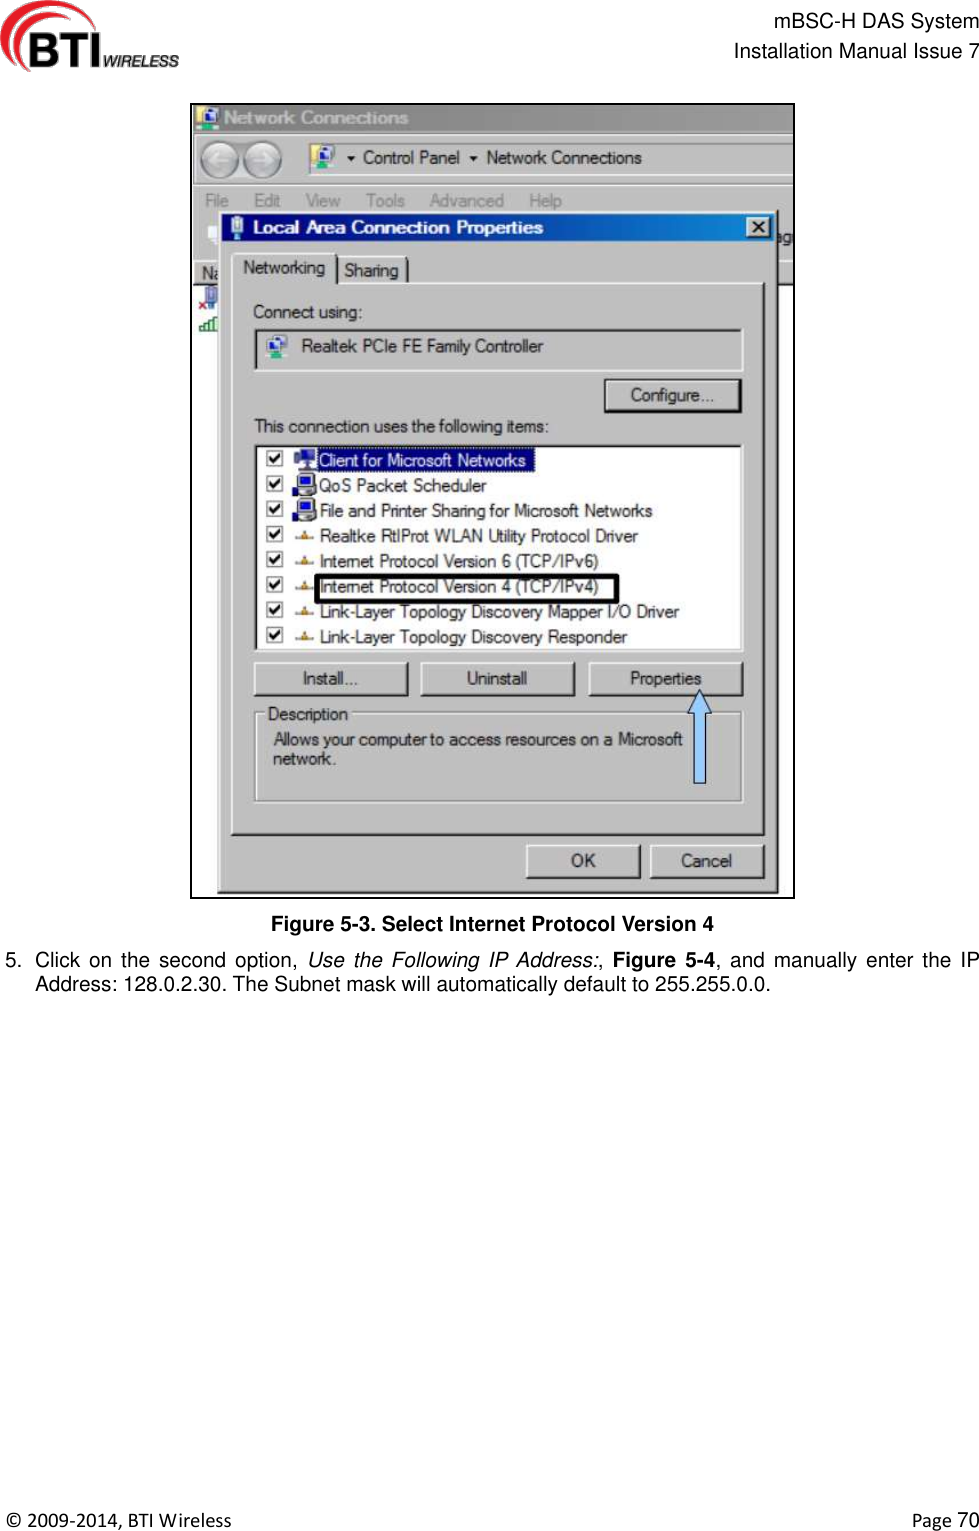                                                   mBSC-H DAS System   Installation Manual Issue 7  ©  2009-2014, BTI Wireless    Page 70  Figure 5-3. Select Internet Protocol Version 4 5.  Click on  the second option,  Use  the Following IP Address:,  Figure 5-4, and  manually  enter the  IP Address: 128.0.2.30. The Subnet mask will automatically default to 255.255.0.0.  